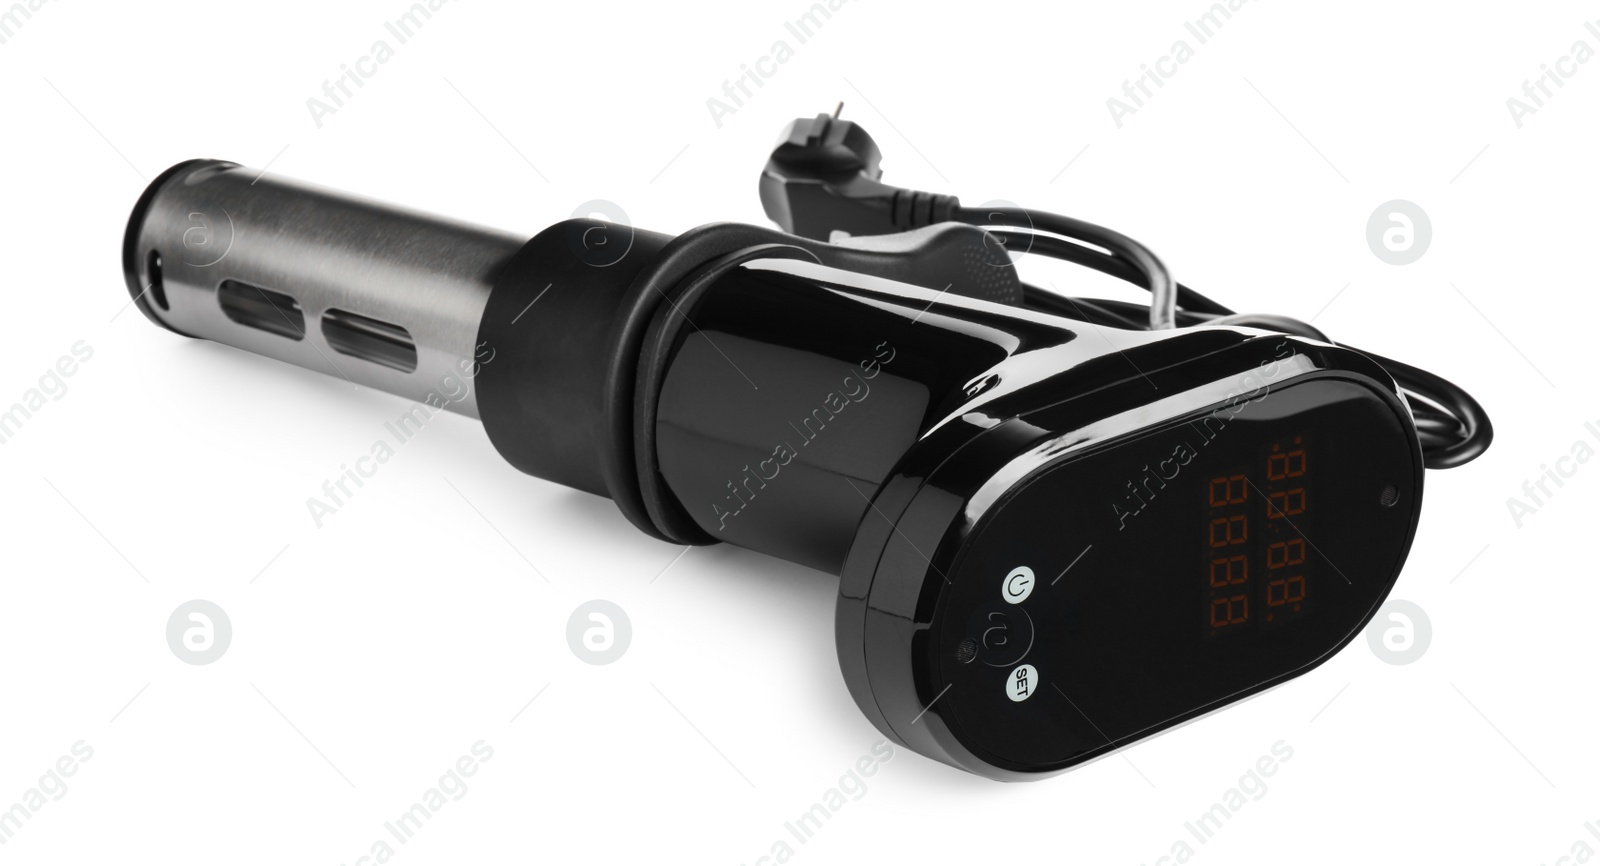 Photo of Thermal immersion circulator isolated on white. Sous vide cooker